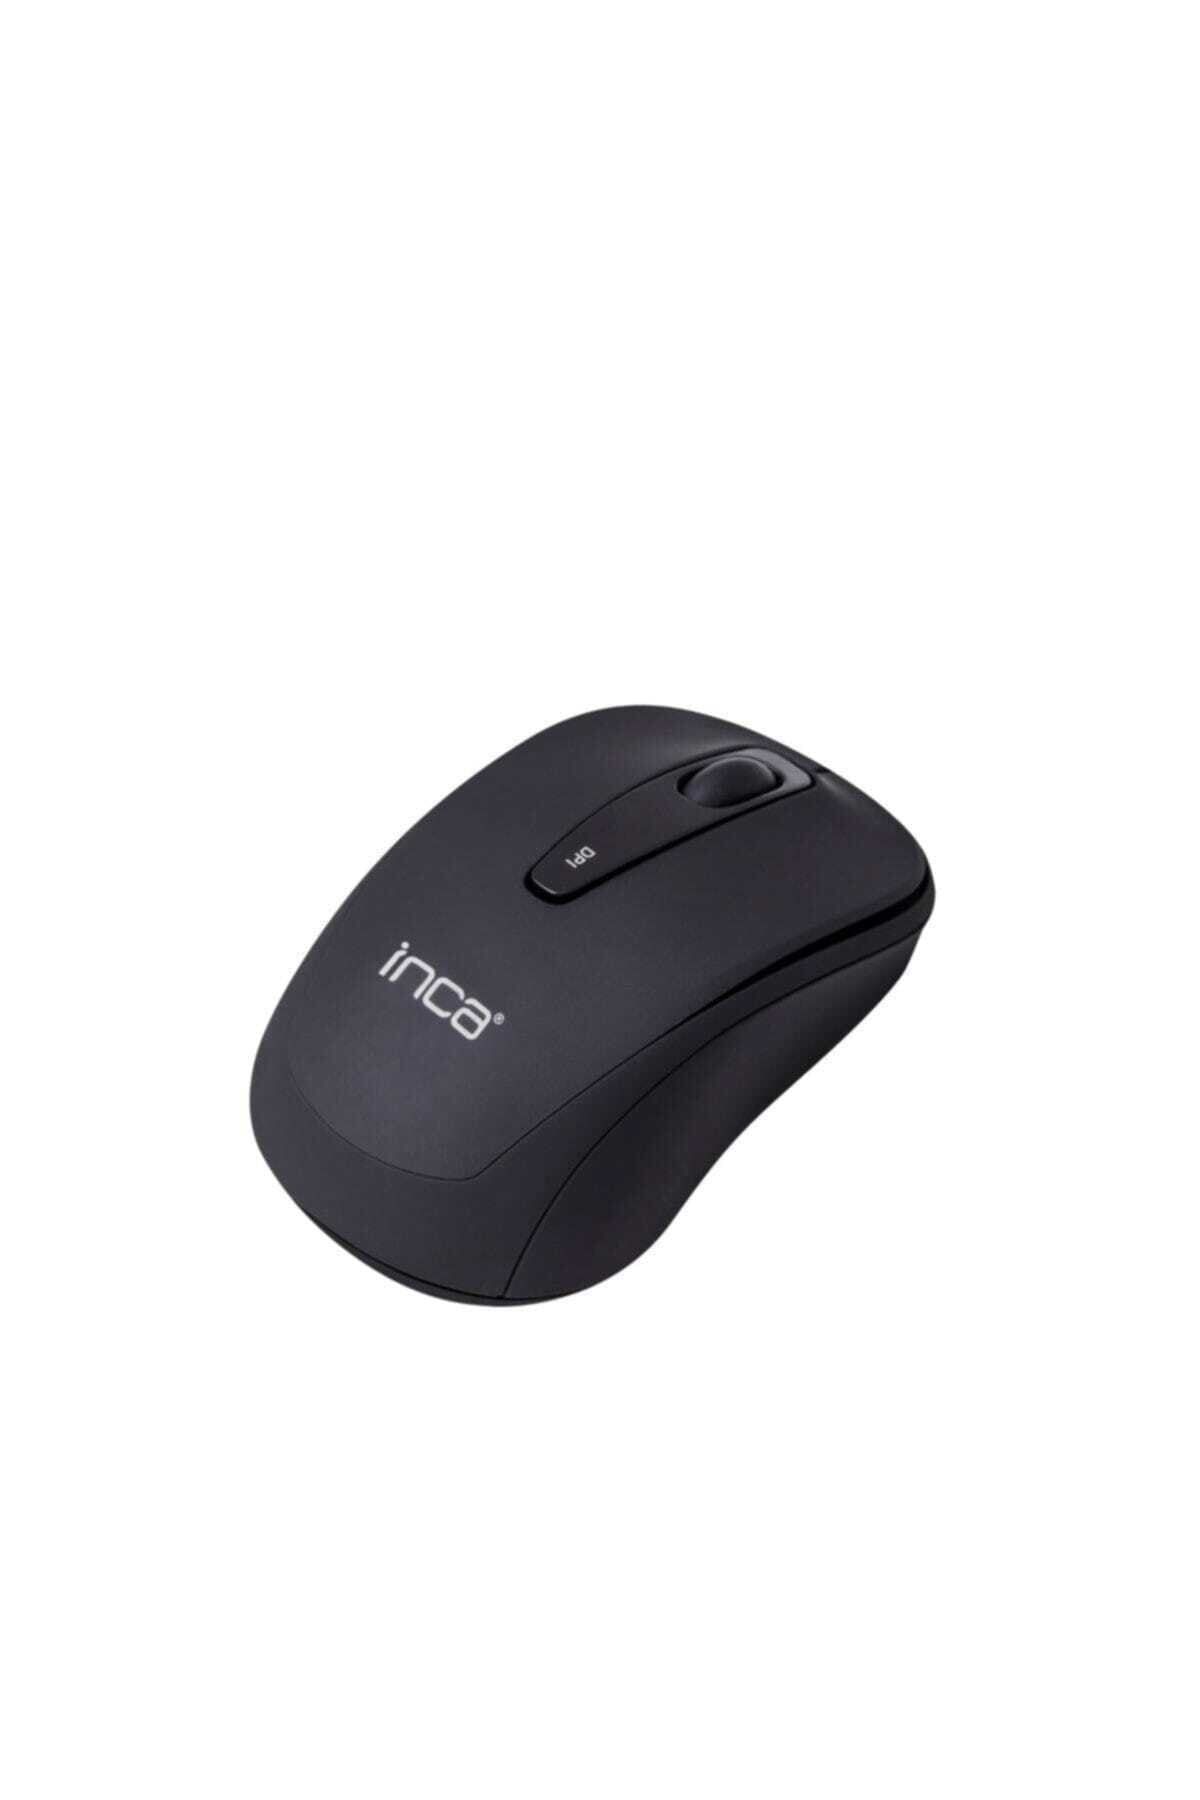 Inca Iwm-331rs Silent Wireless Mouse (sessiz Mouse )